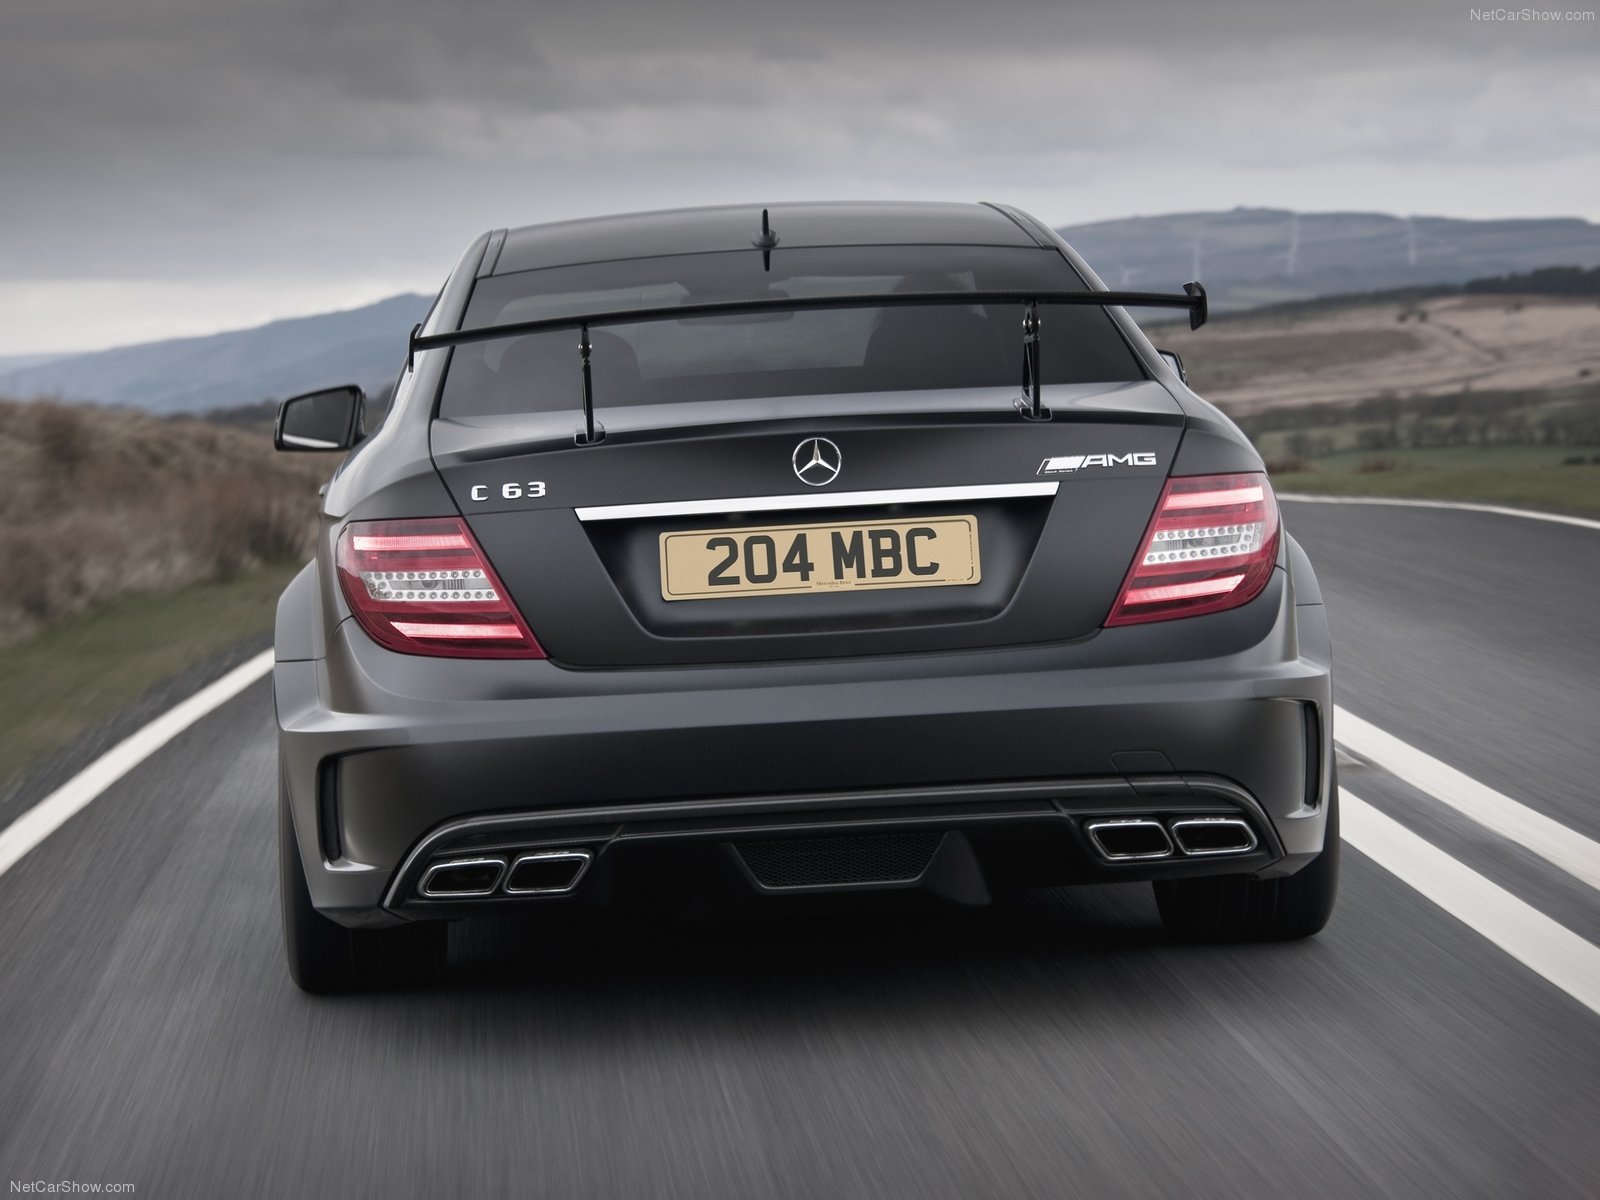 Benz C63 Amg Coupe Black Series Cars Wallpaper Background